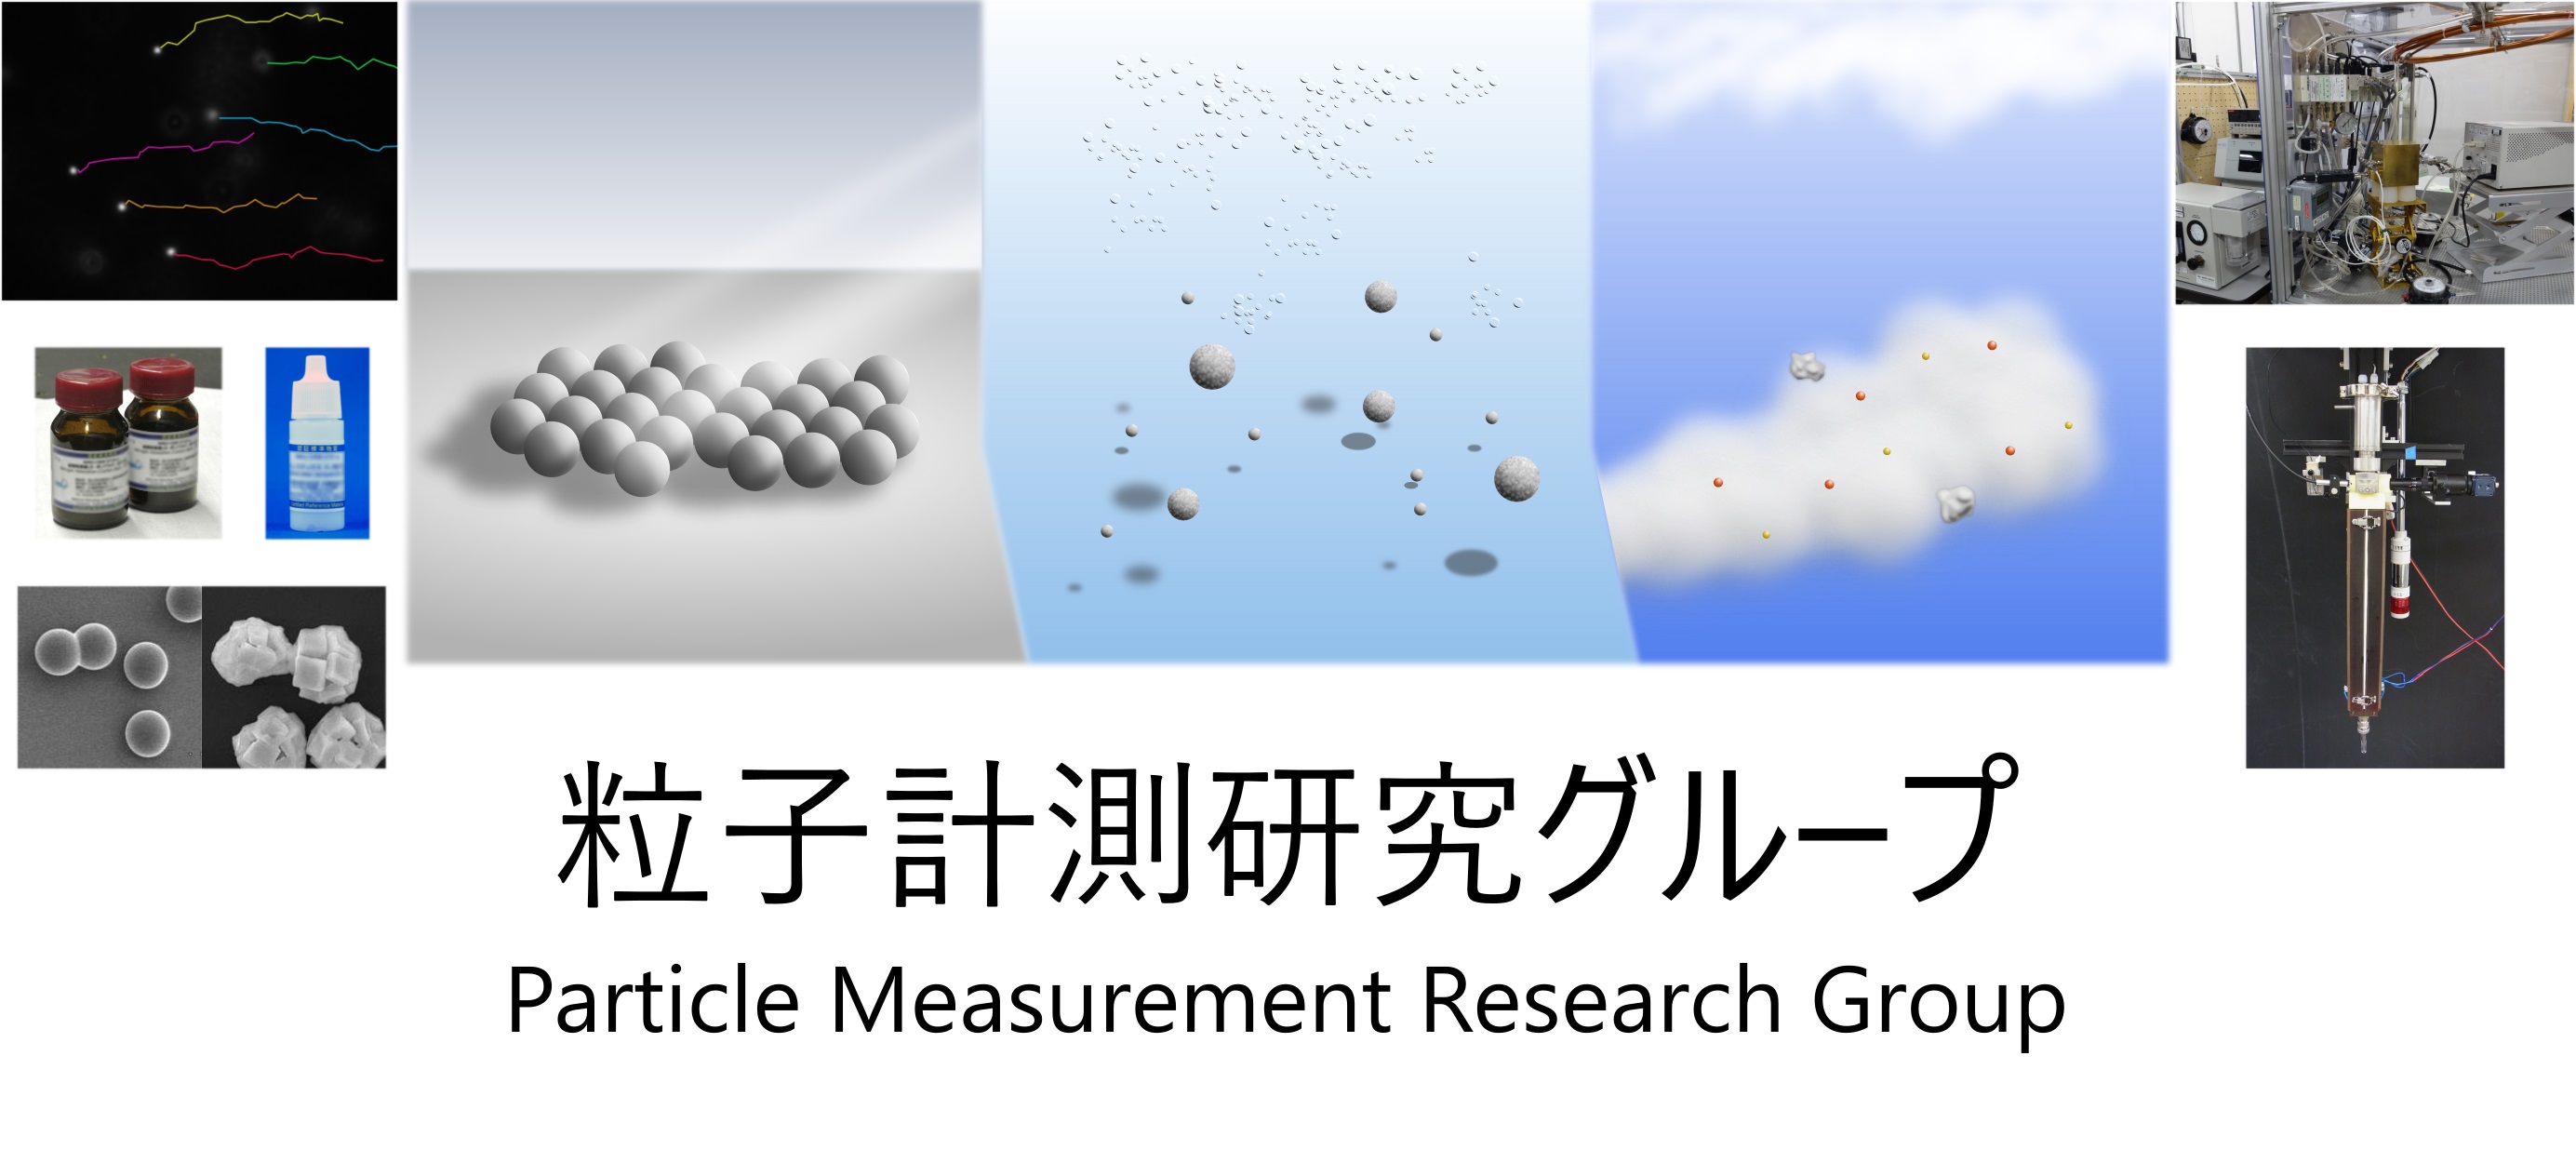 Welcome to Particle Measurement Research Group!